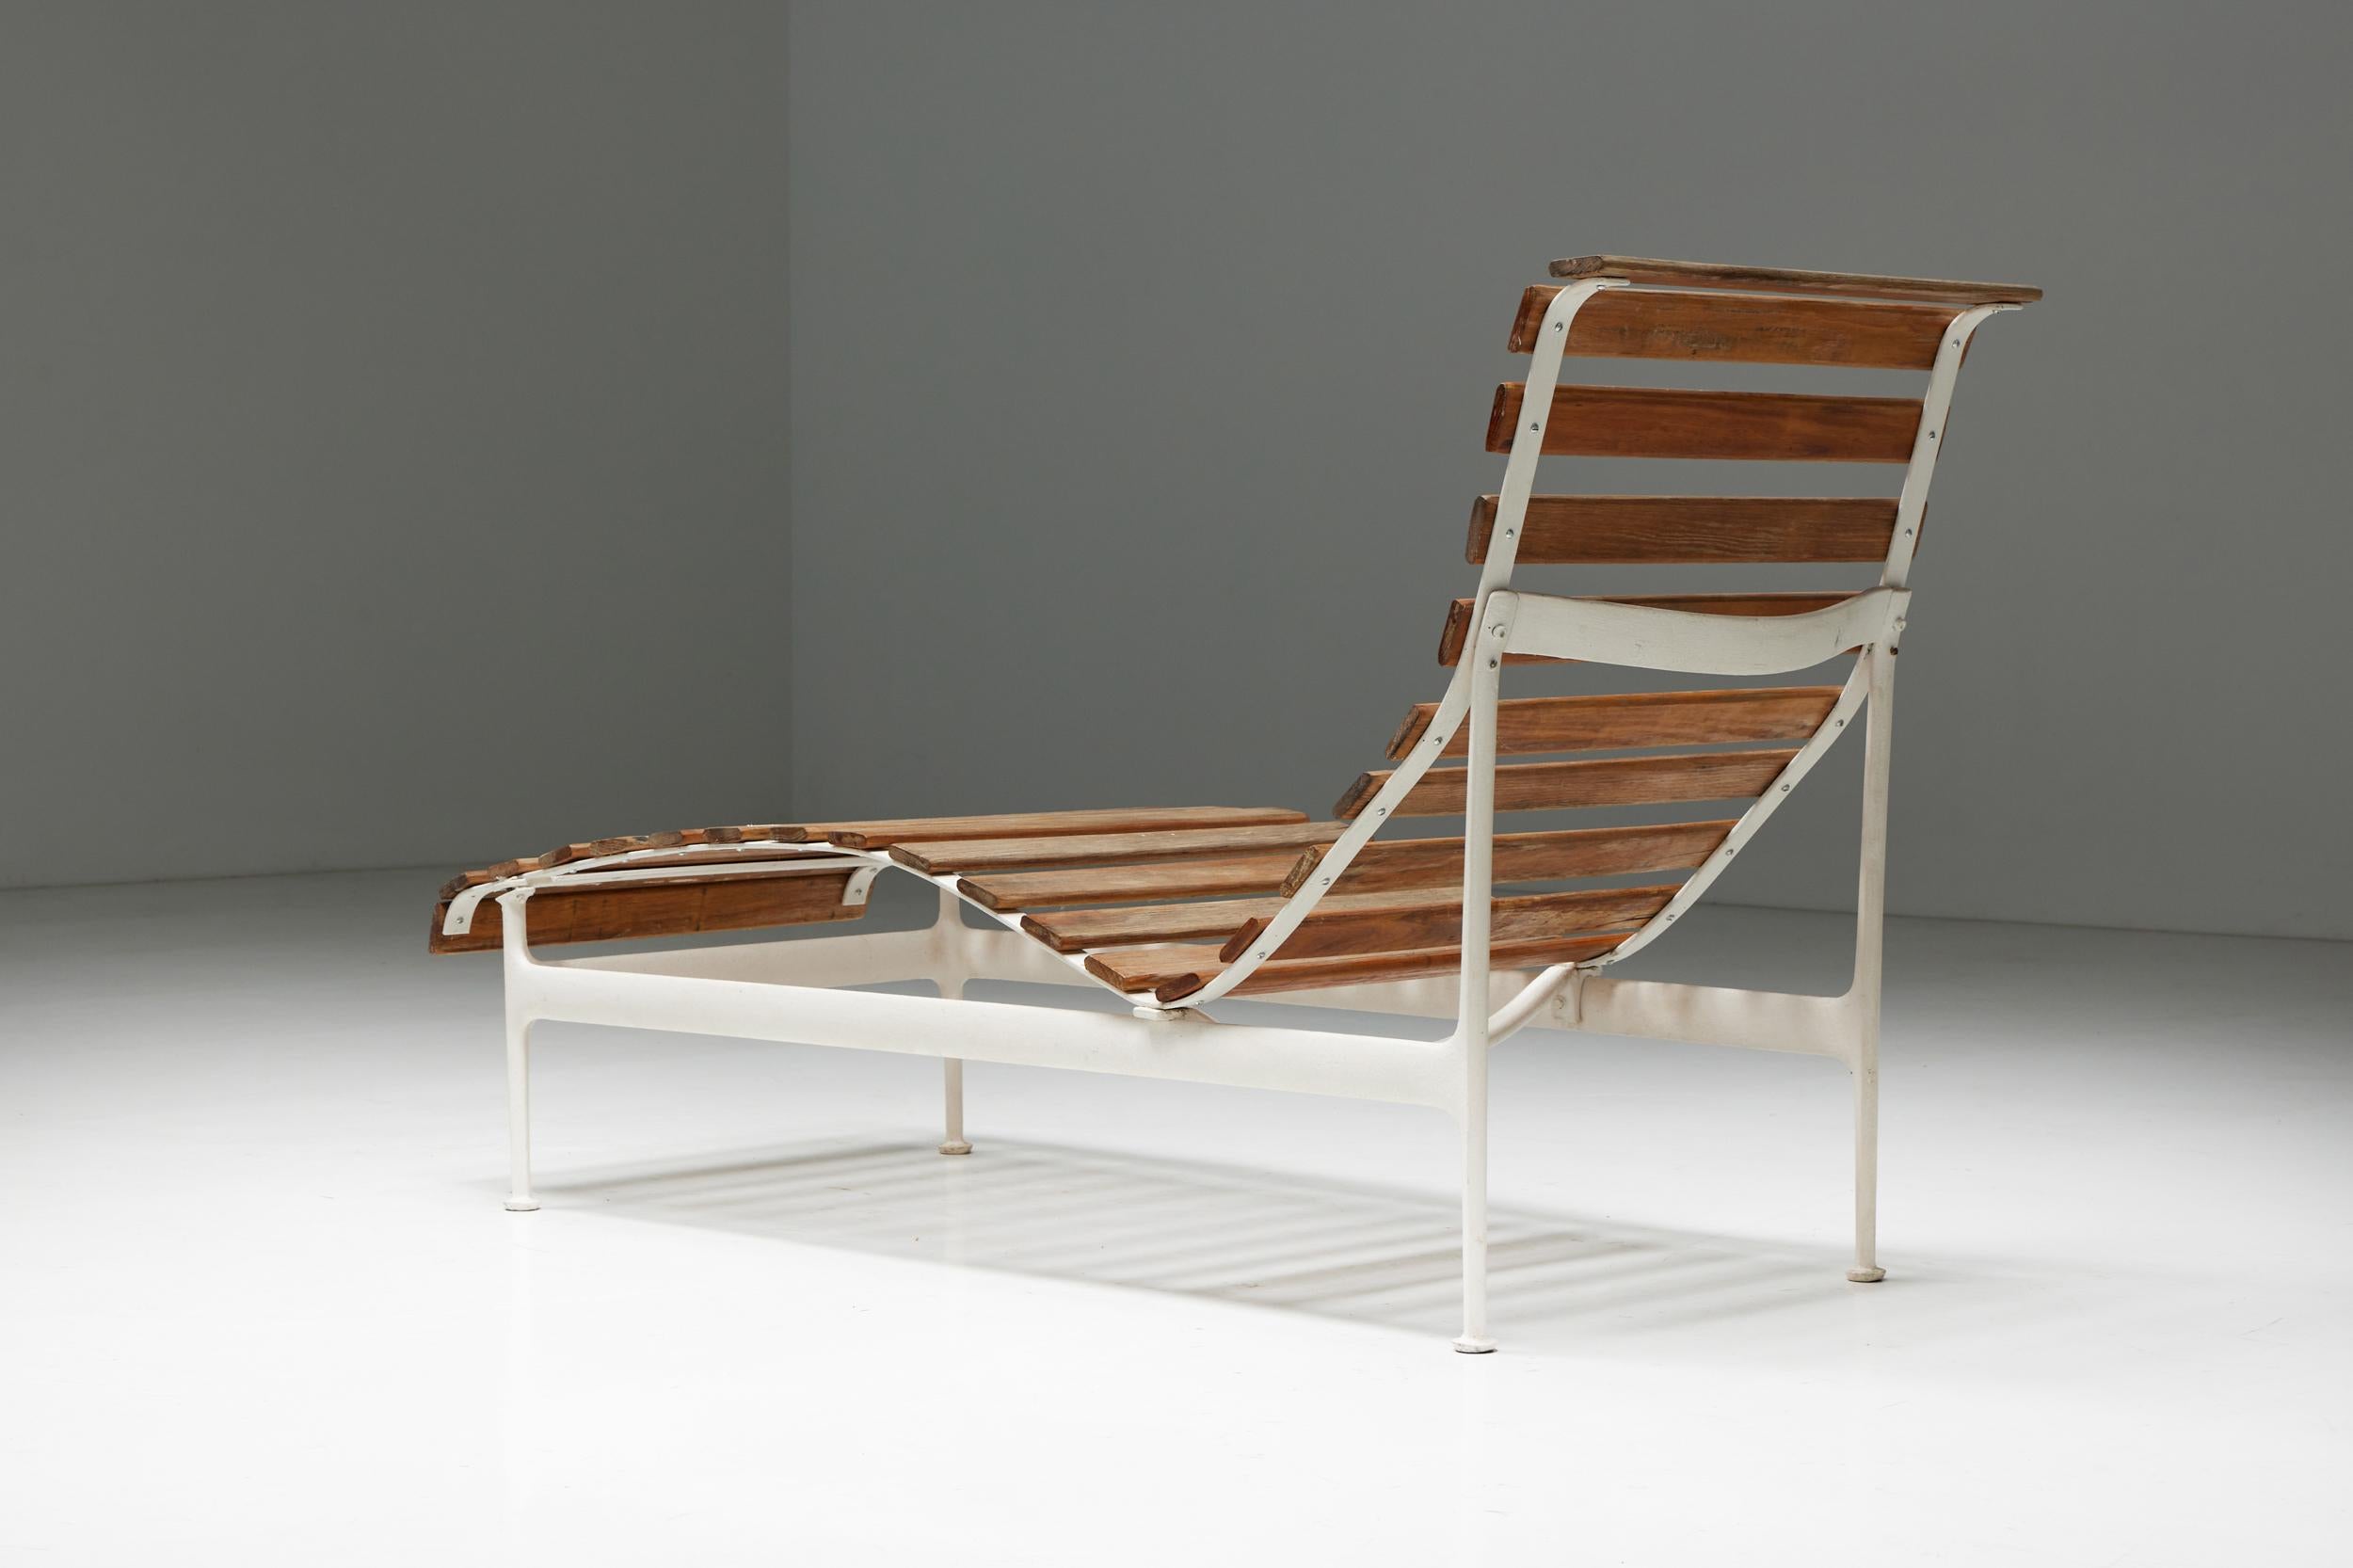 Mid-20th Century Chaise Longue by Richard Schultz for Knoll International, United States, 1960s For Sale